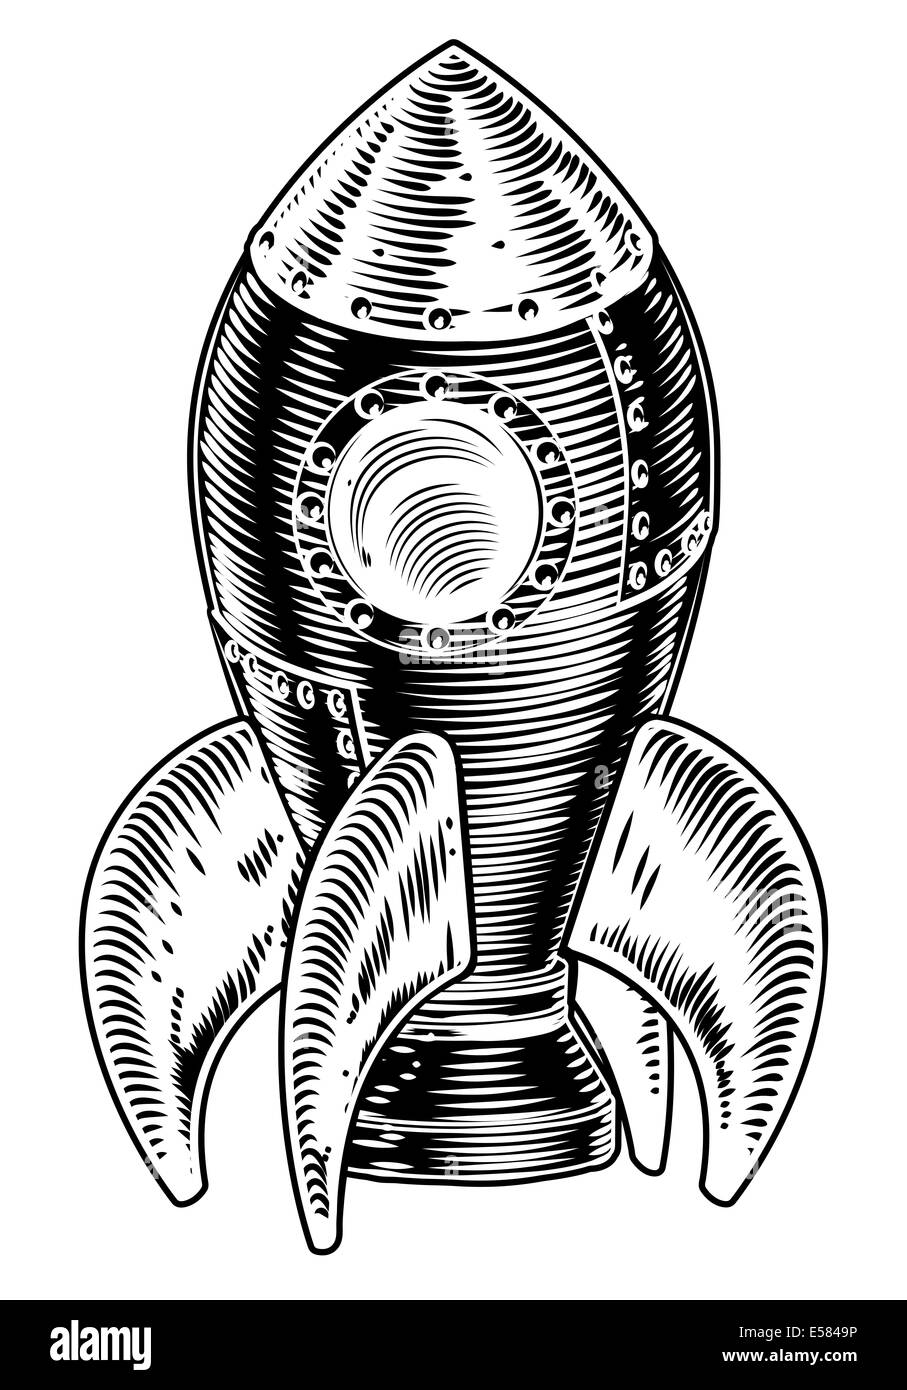 Rocket ship illustration of a space ship in a vintage woodcut style Stock Photo